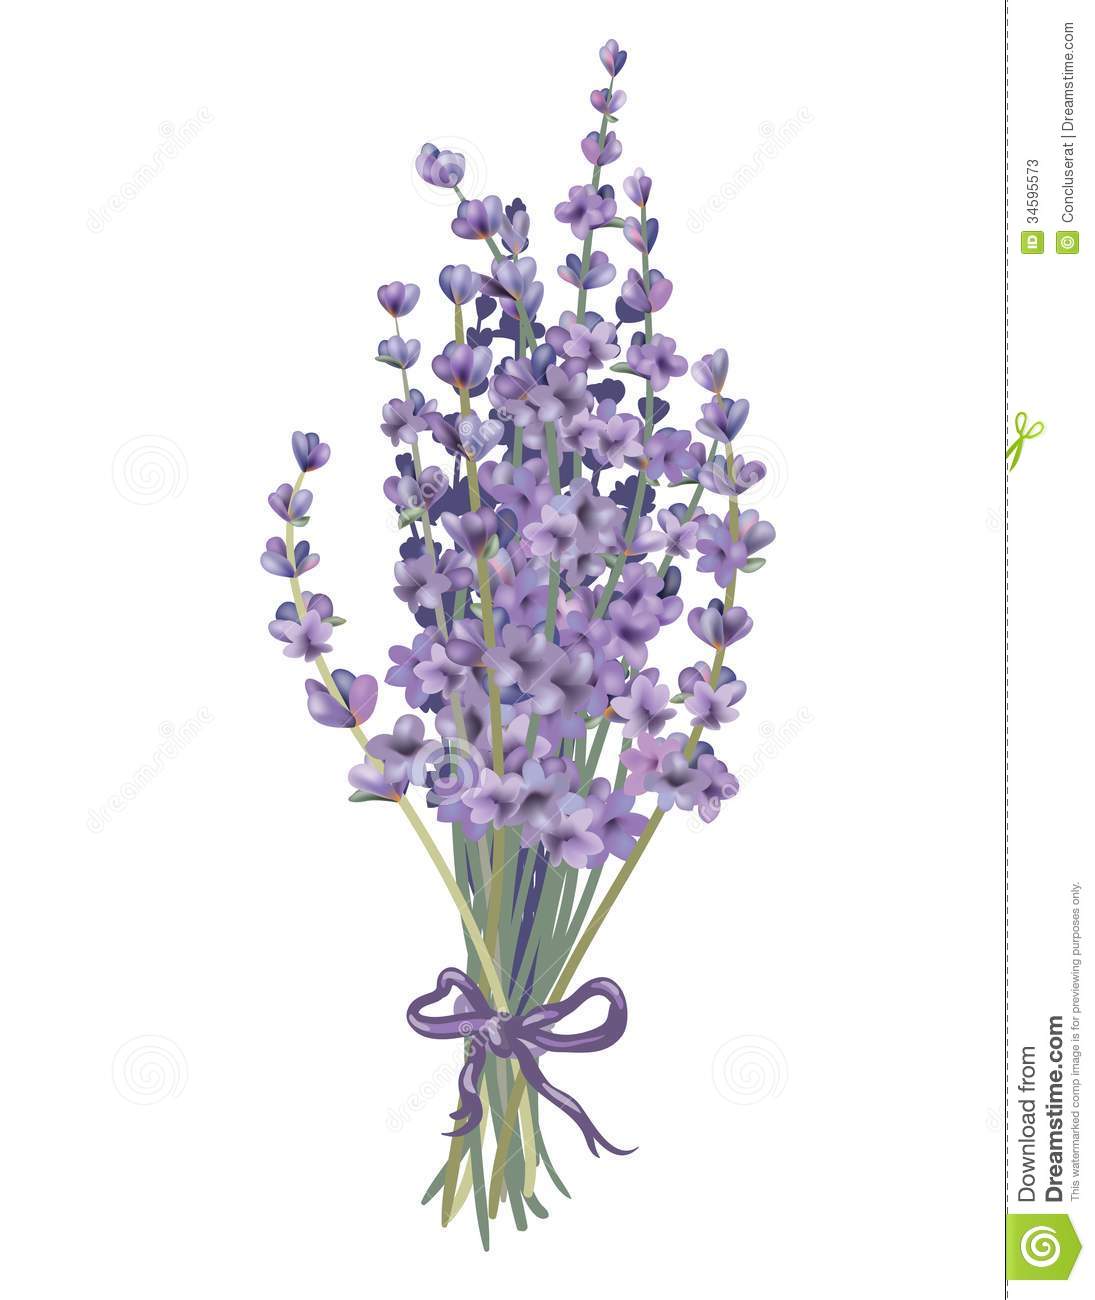 Lavender clipart #20, Download drawings